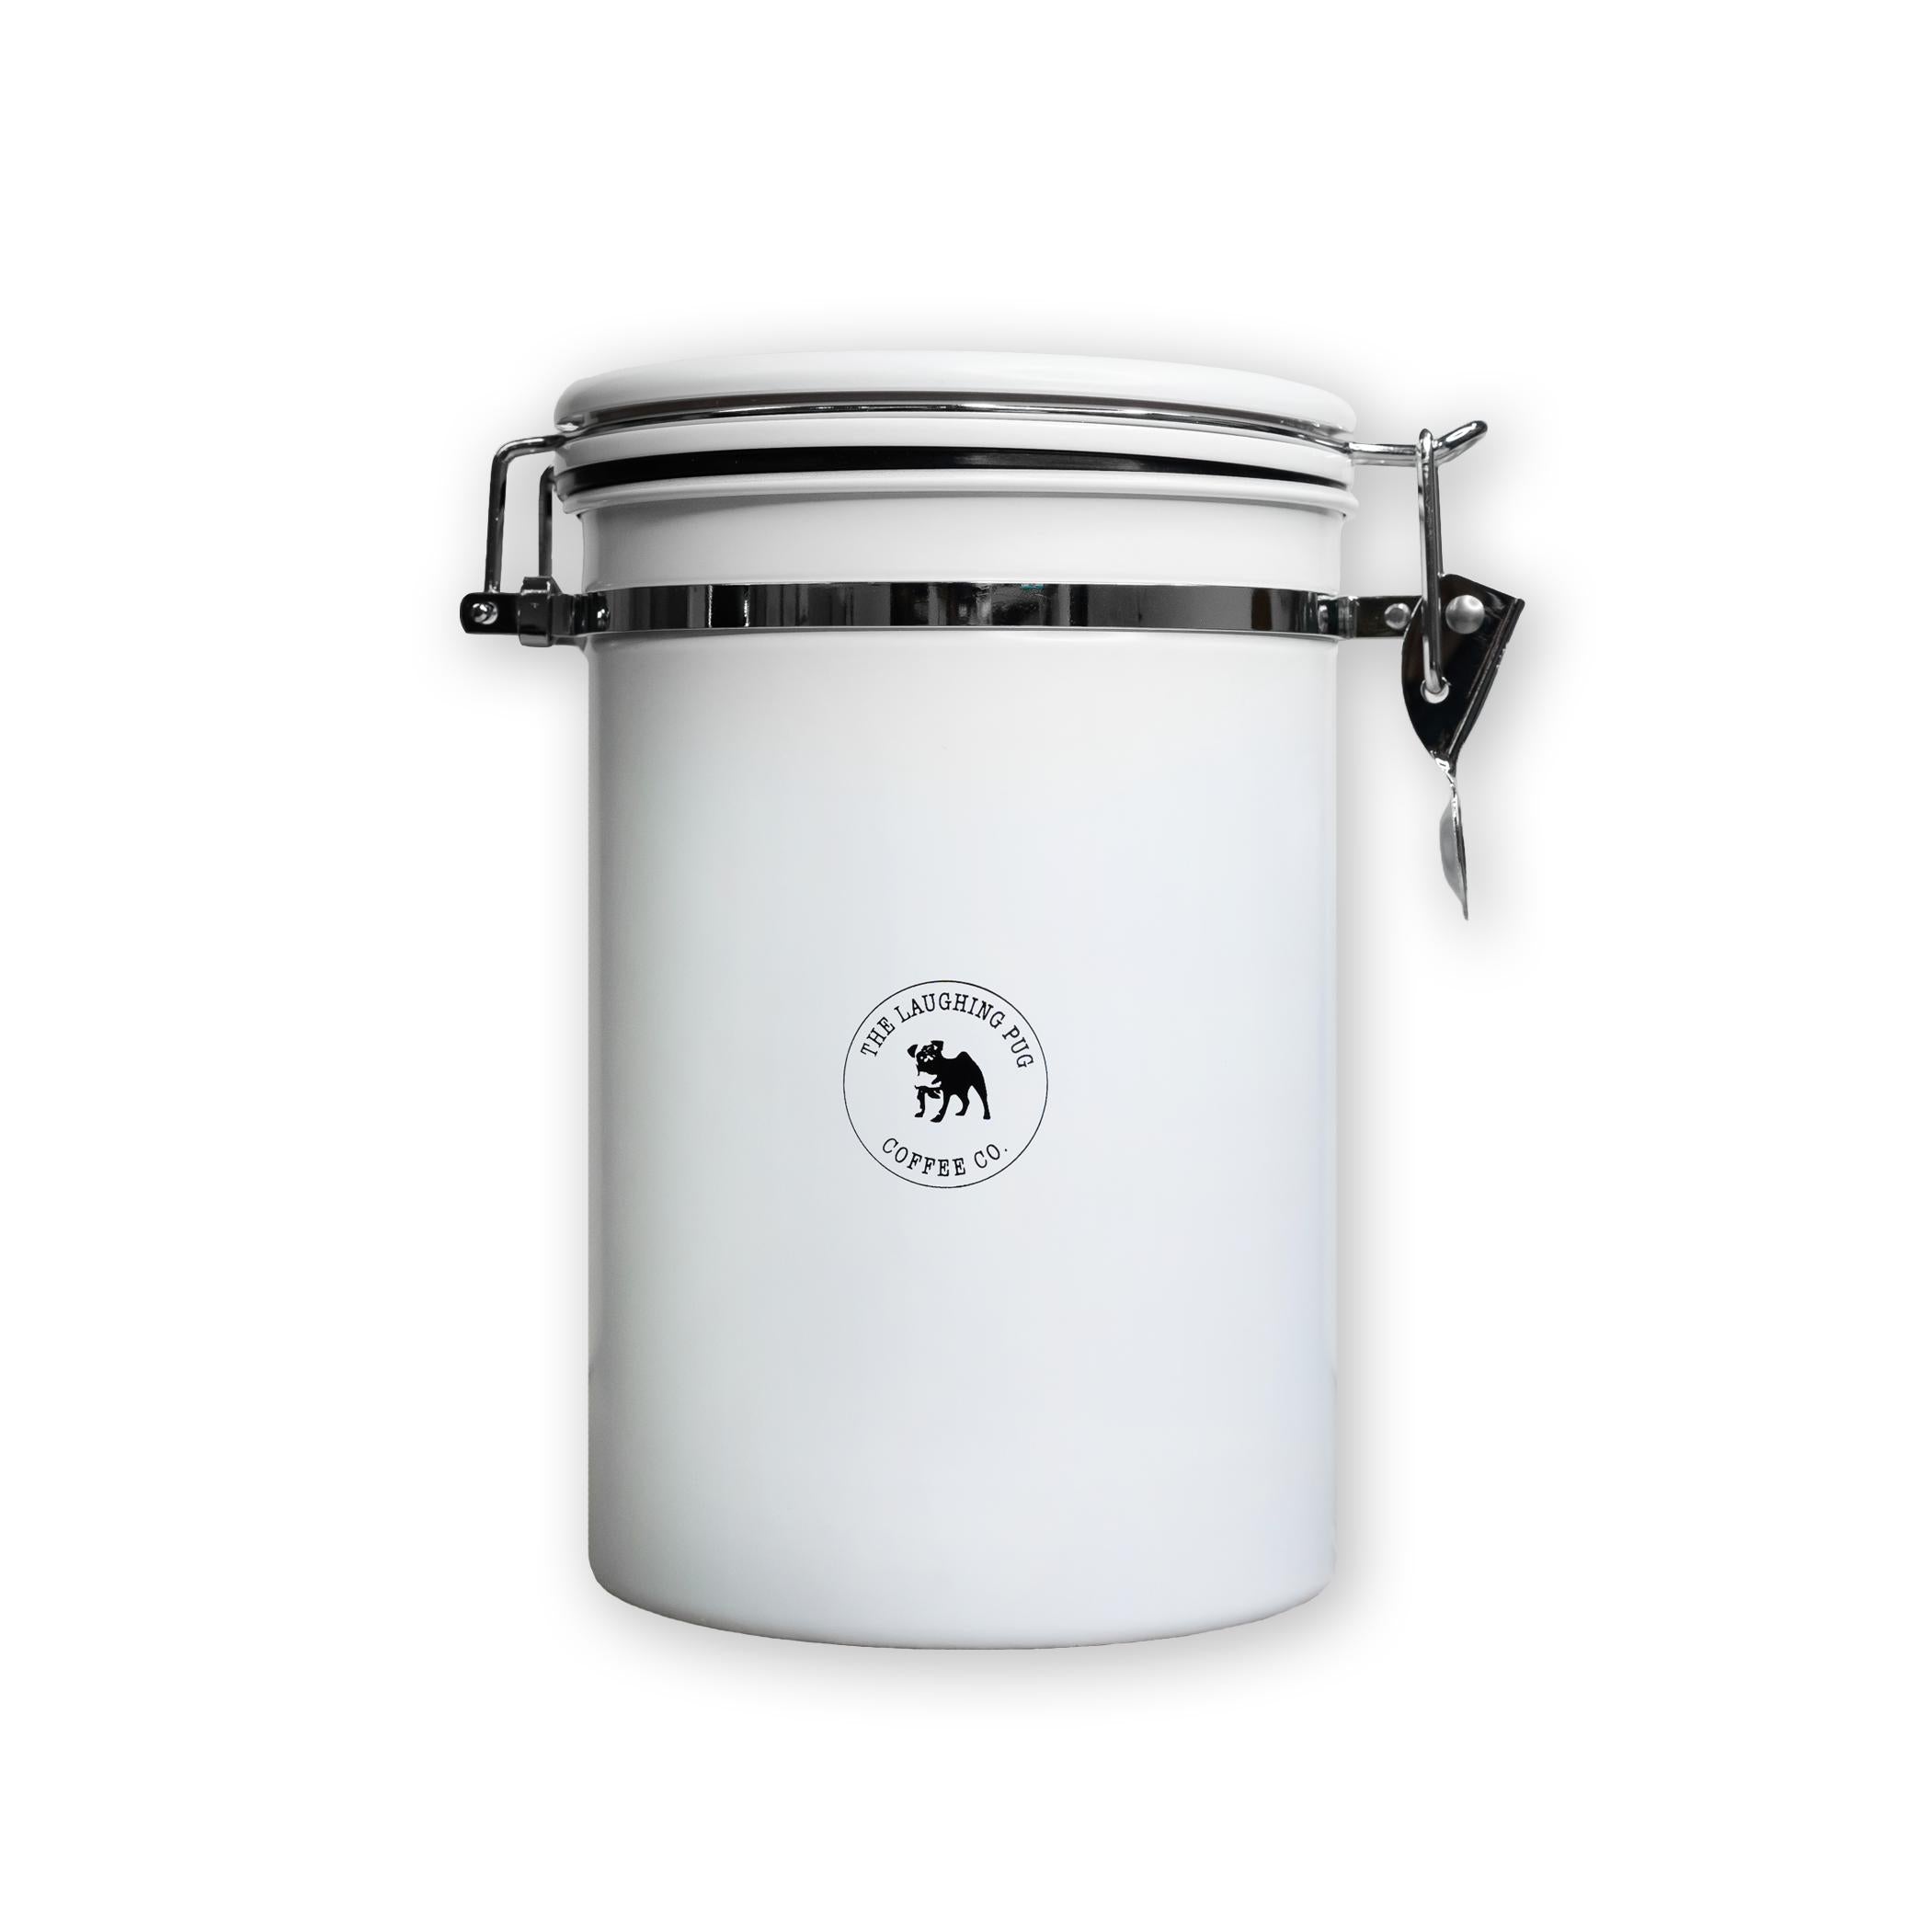 White Stainless Steel Storage Canisters with CO2 release valve